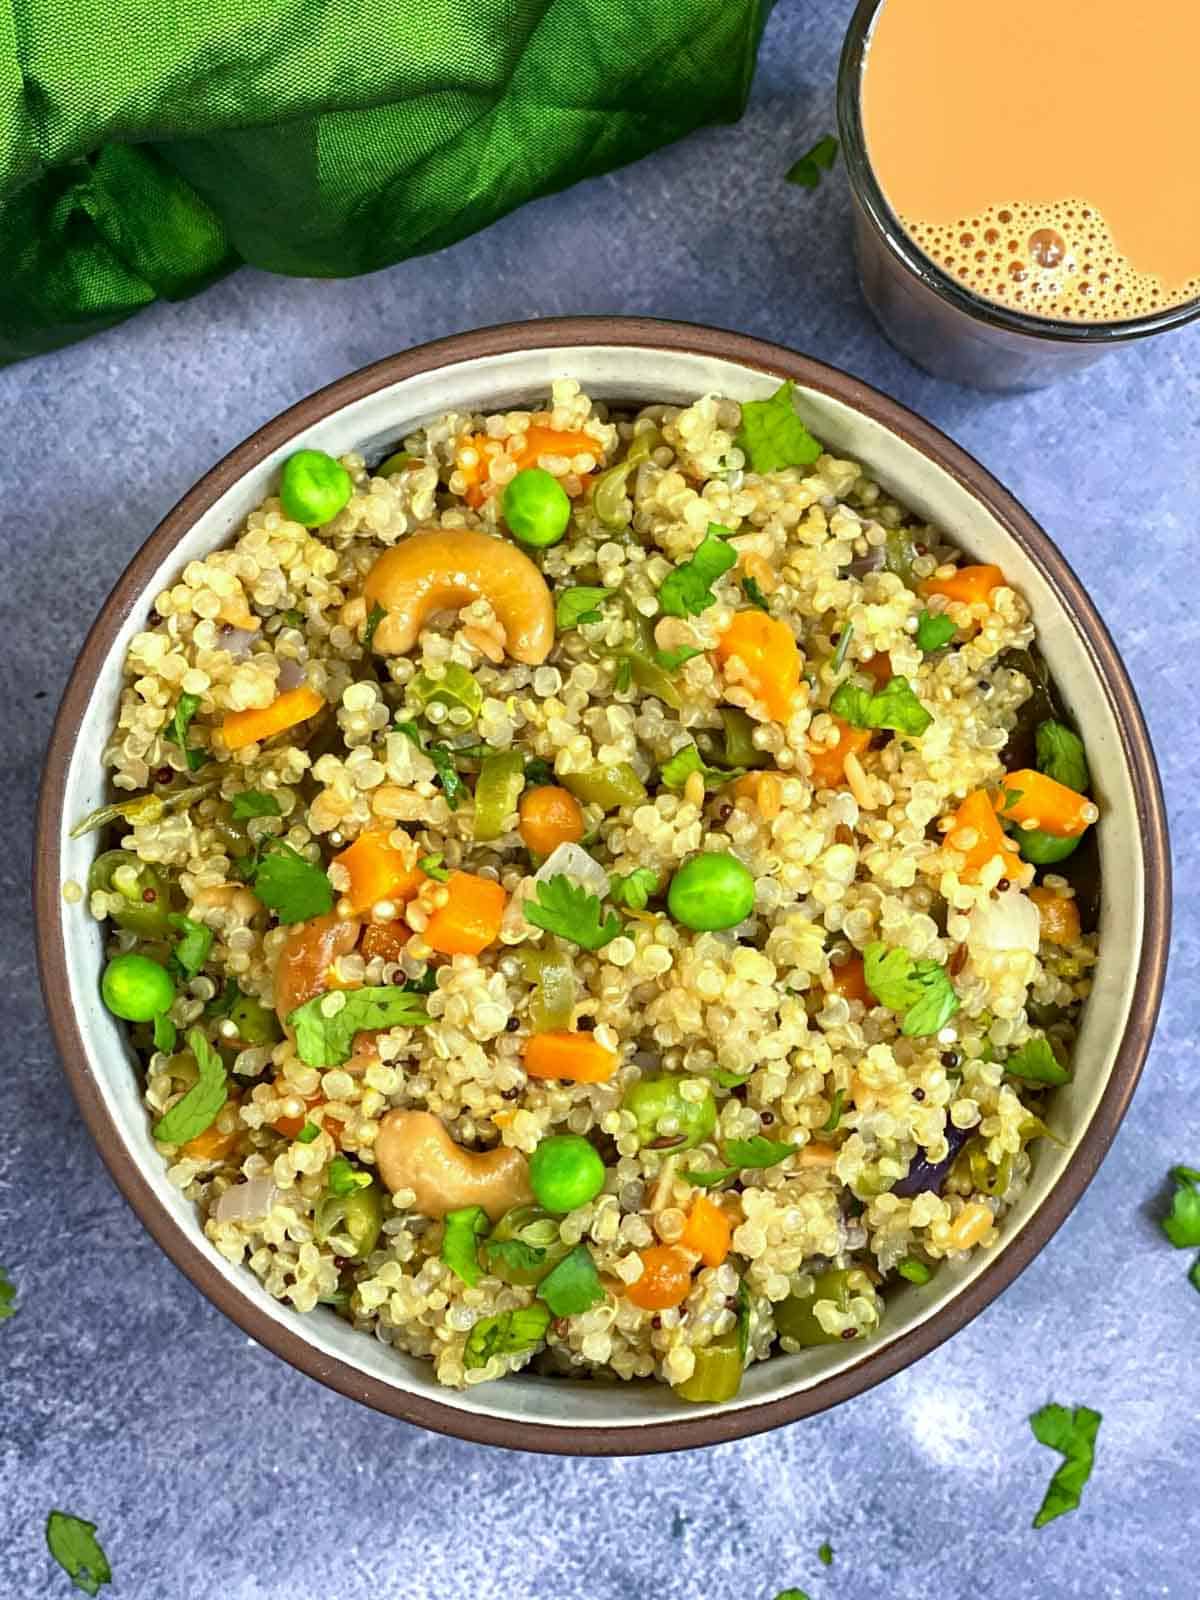 vegetable quinoa upma served in a bowl with tea on the side